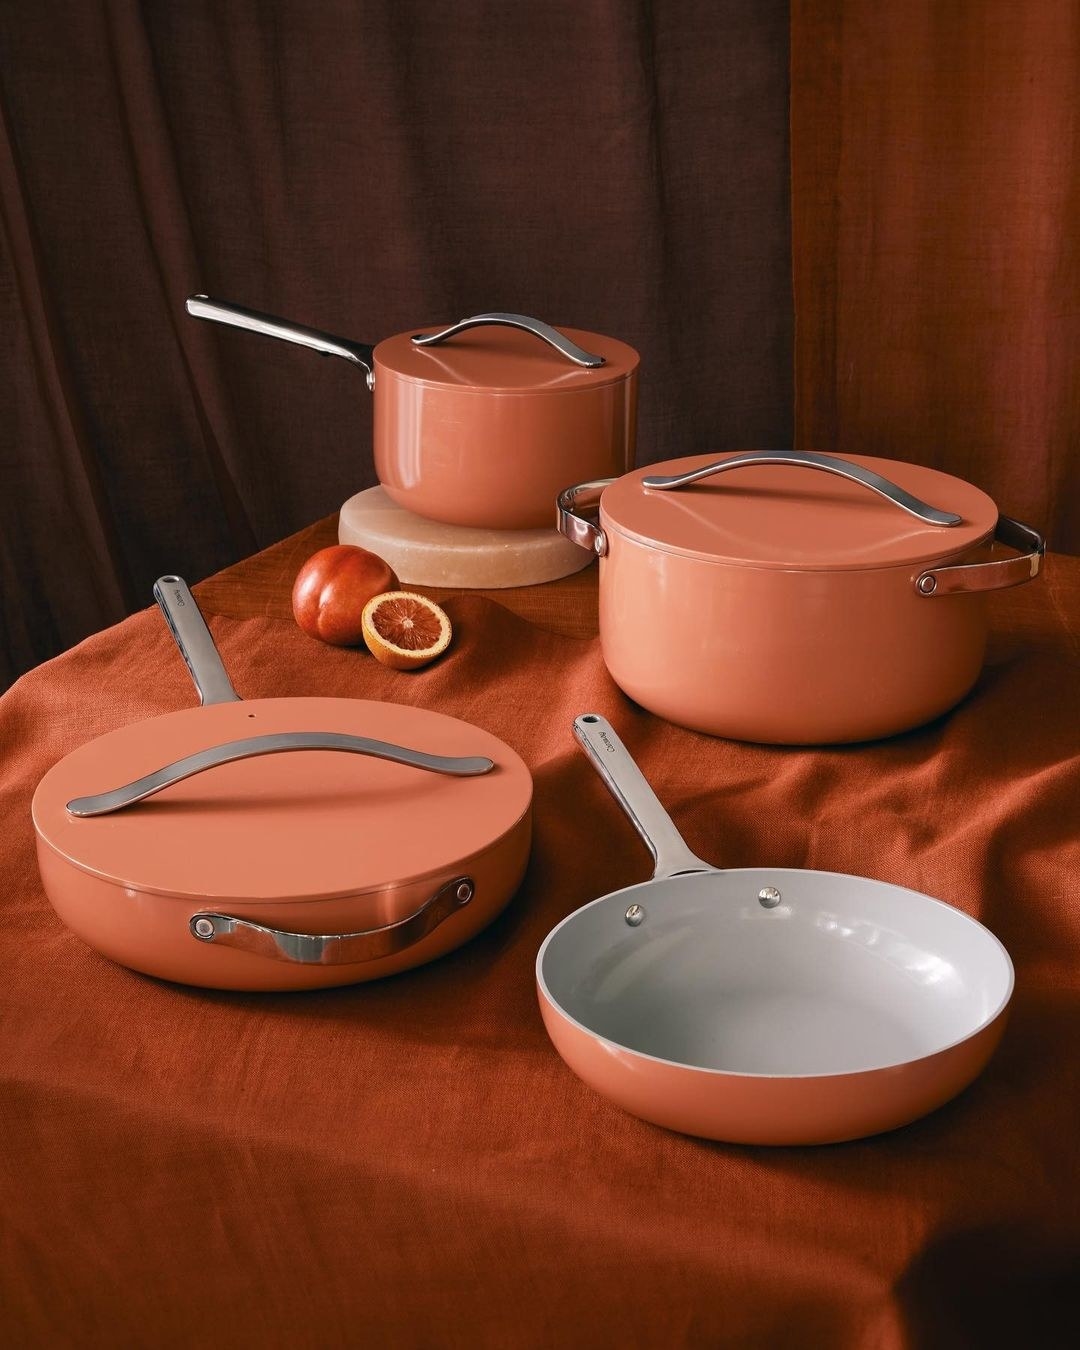 The cookware set in the color Perracotta